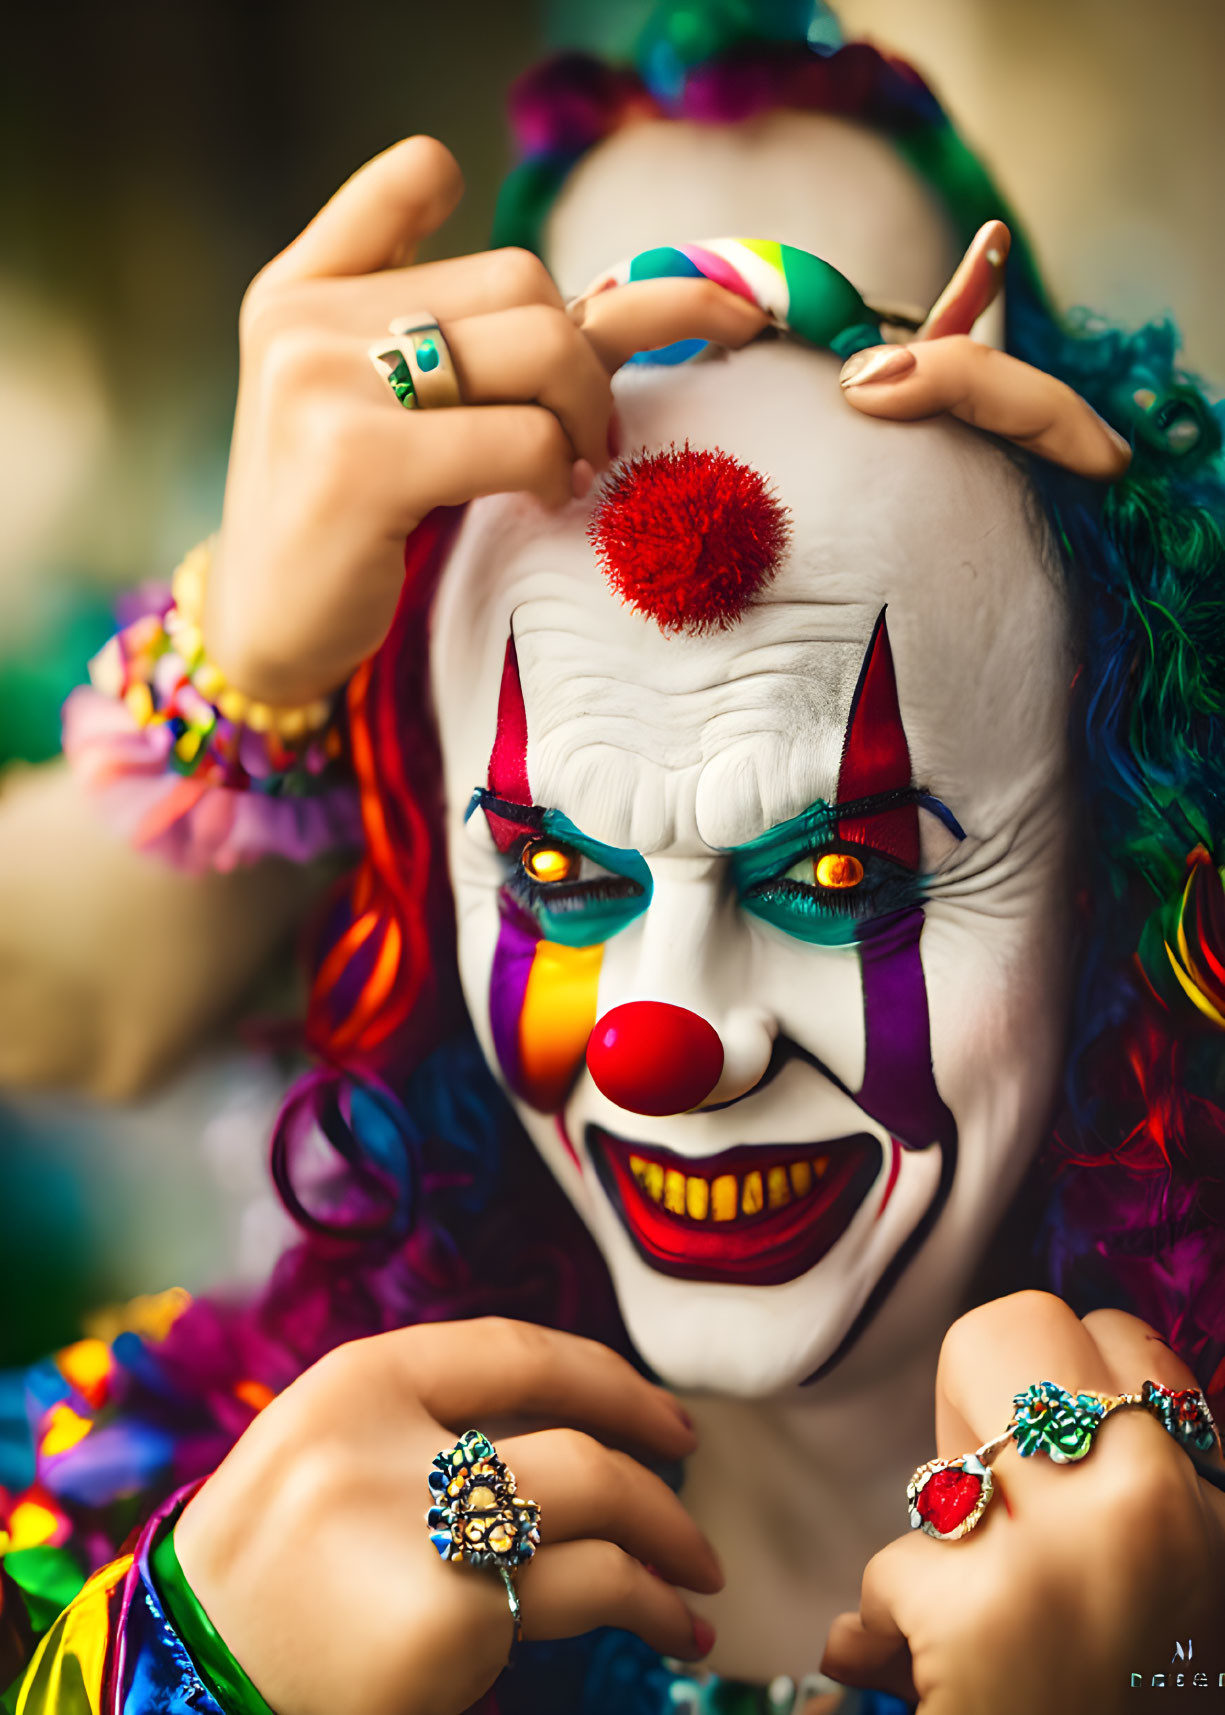 Colorful clown with vibrant makeup and rainbow hair posing with red nose and chunky rings